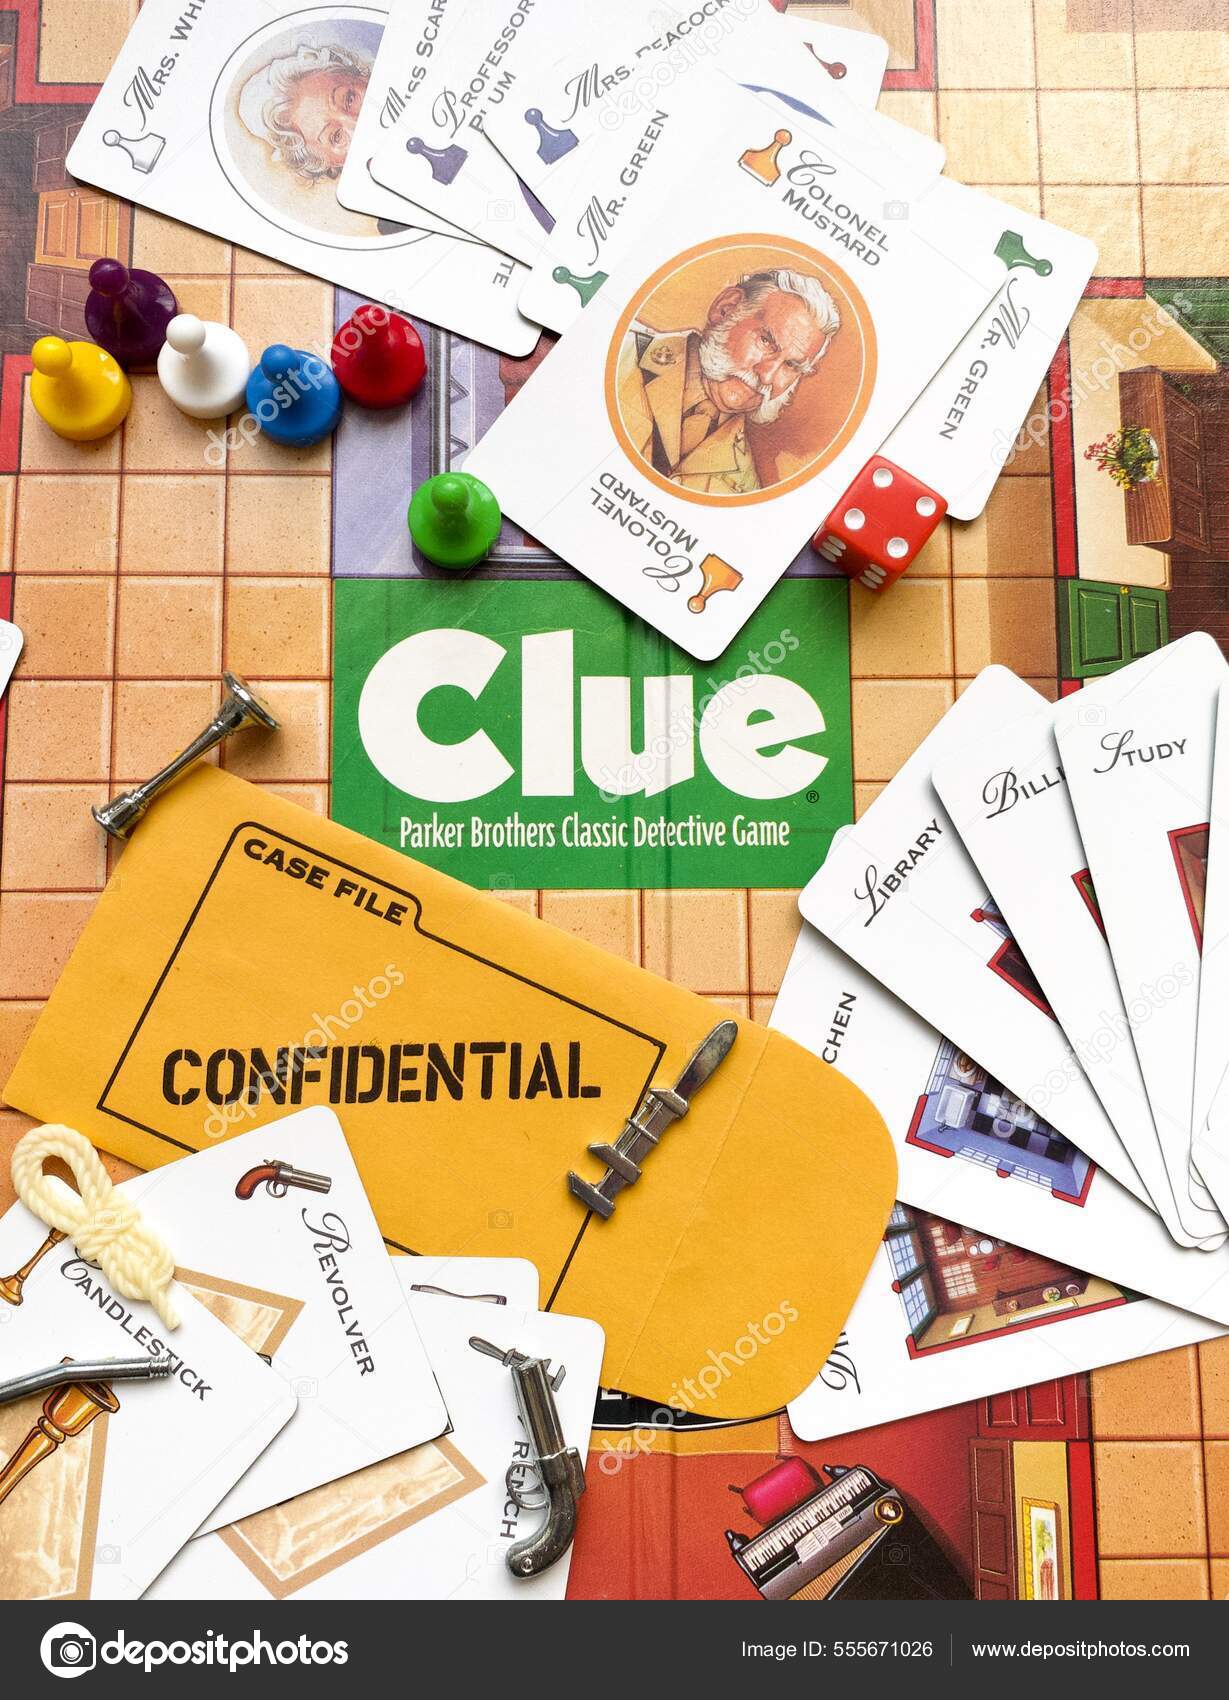 Cluedo is a Classic Murder Mystery Detective Board Game Editorial